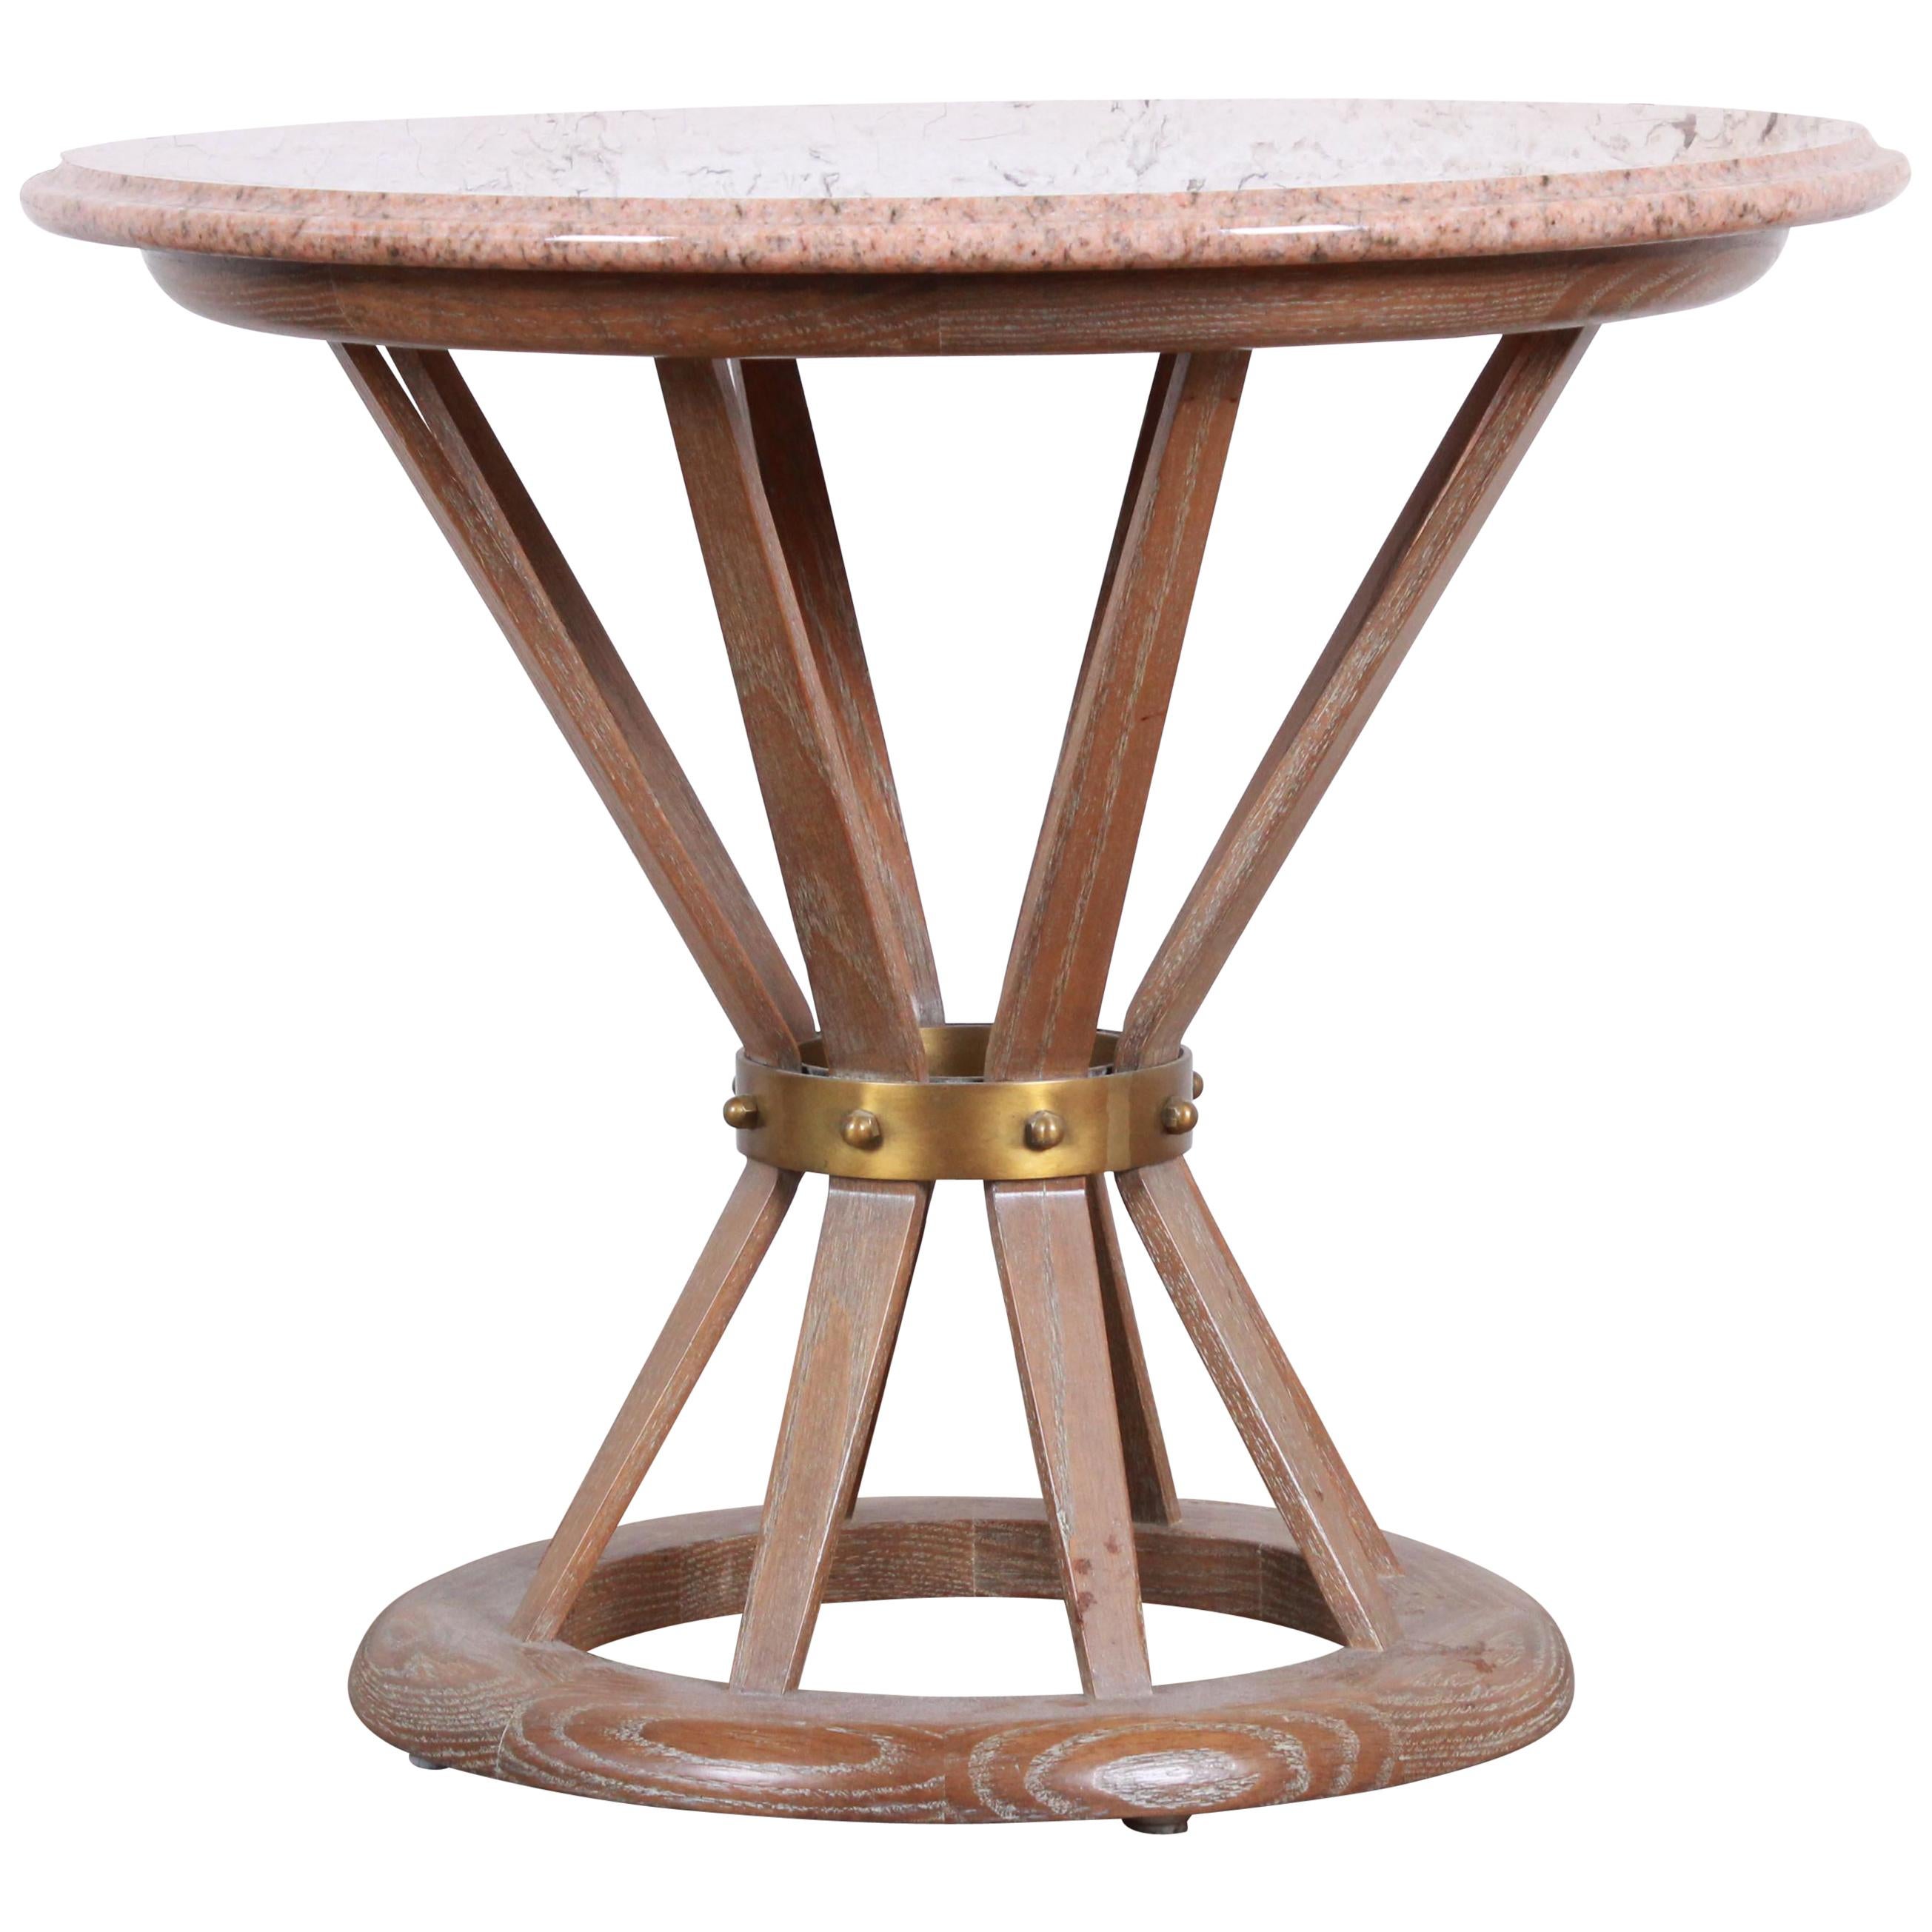 Edward Wormey for Dunbar Style Sheaf of Wheat Marble-Top Side Tables For Sale